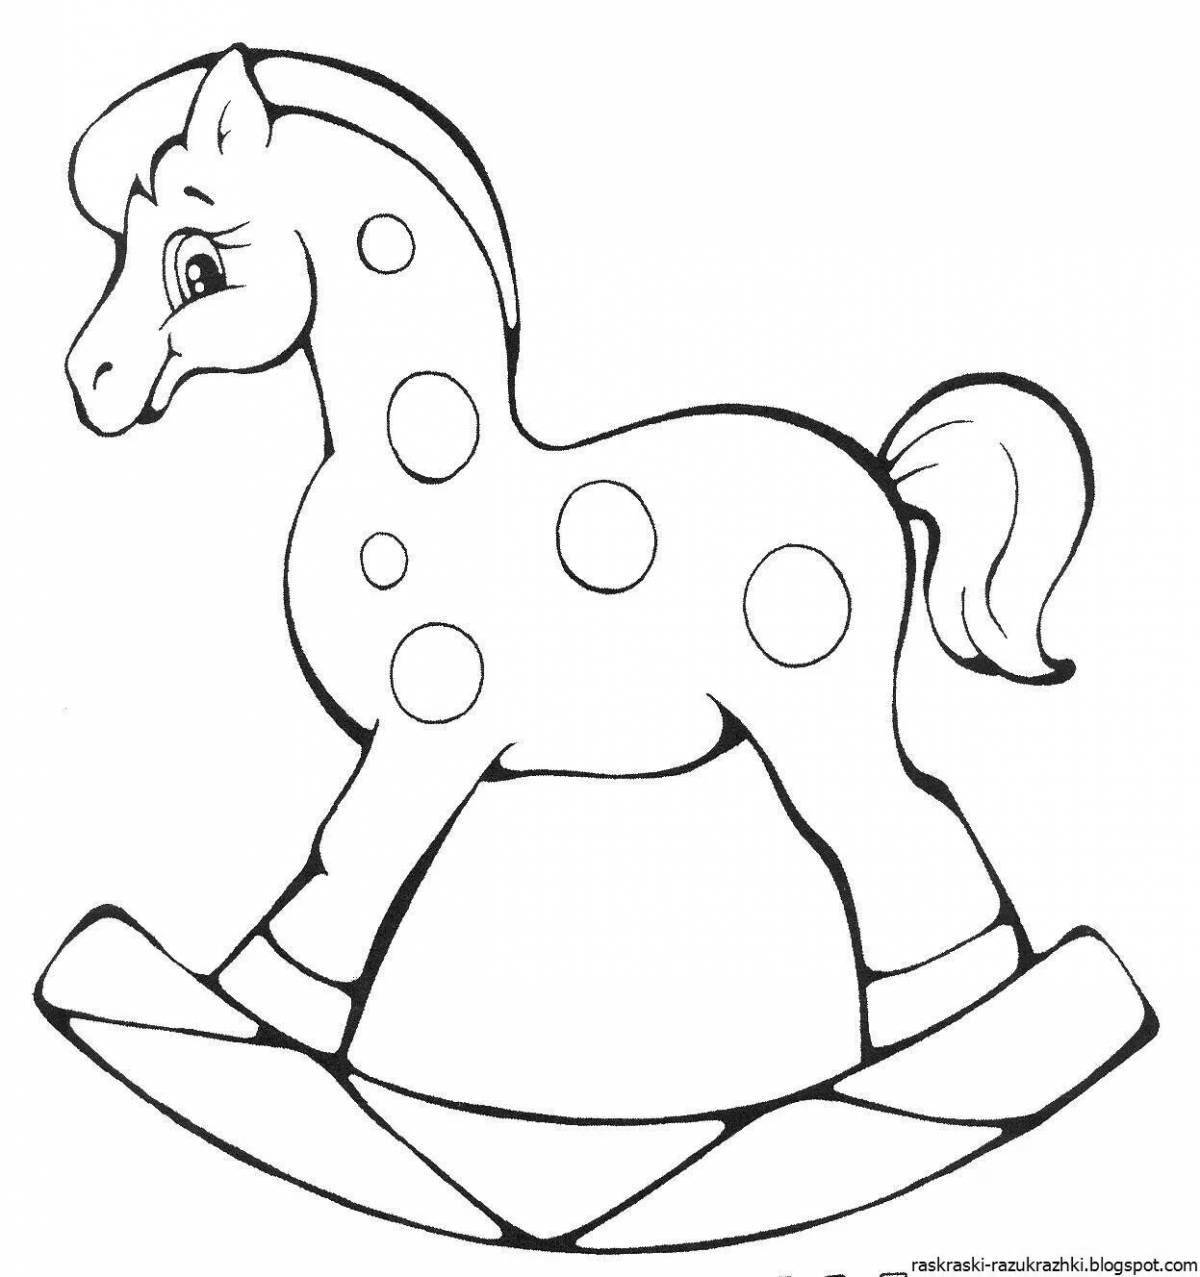 Cute rocking horse coloring book for kids